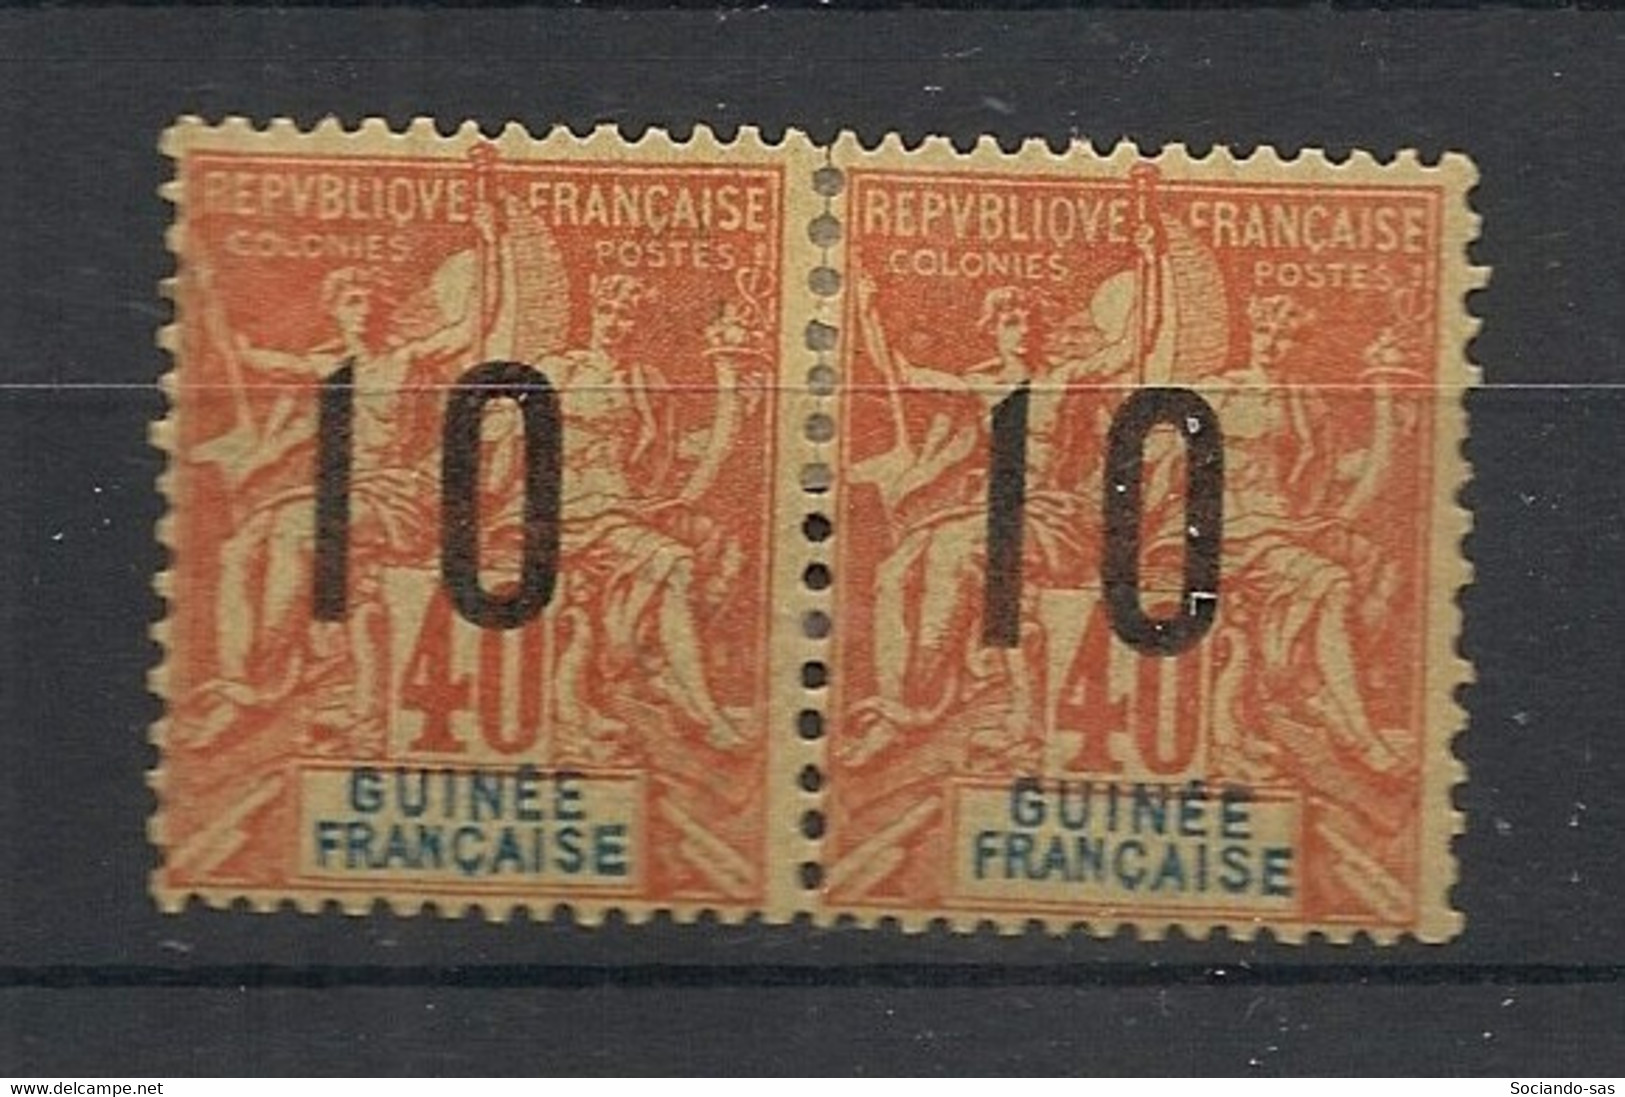 GUINEE - 1912 - N°Yv. 53Aa - Type Groupe 10 Sur 40c - VARIETE Chiffres Espacés - Neuf * / MH VF - Nuevos